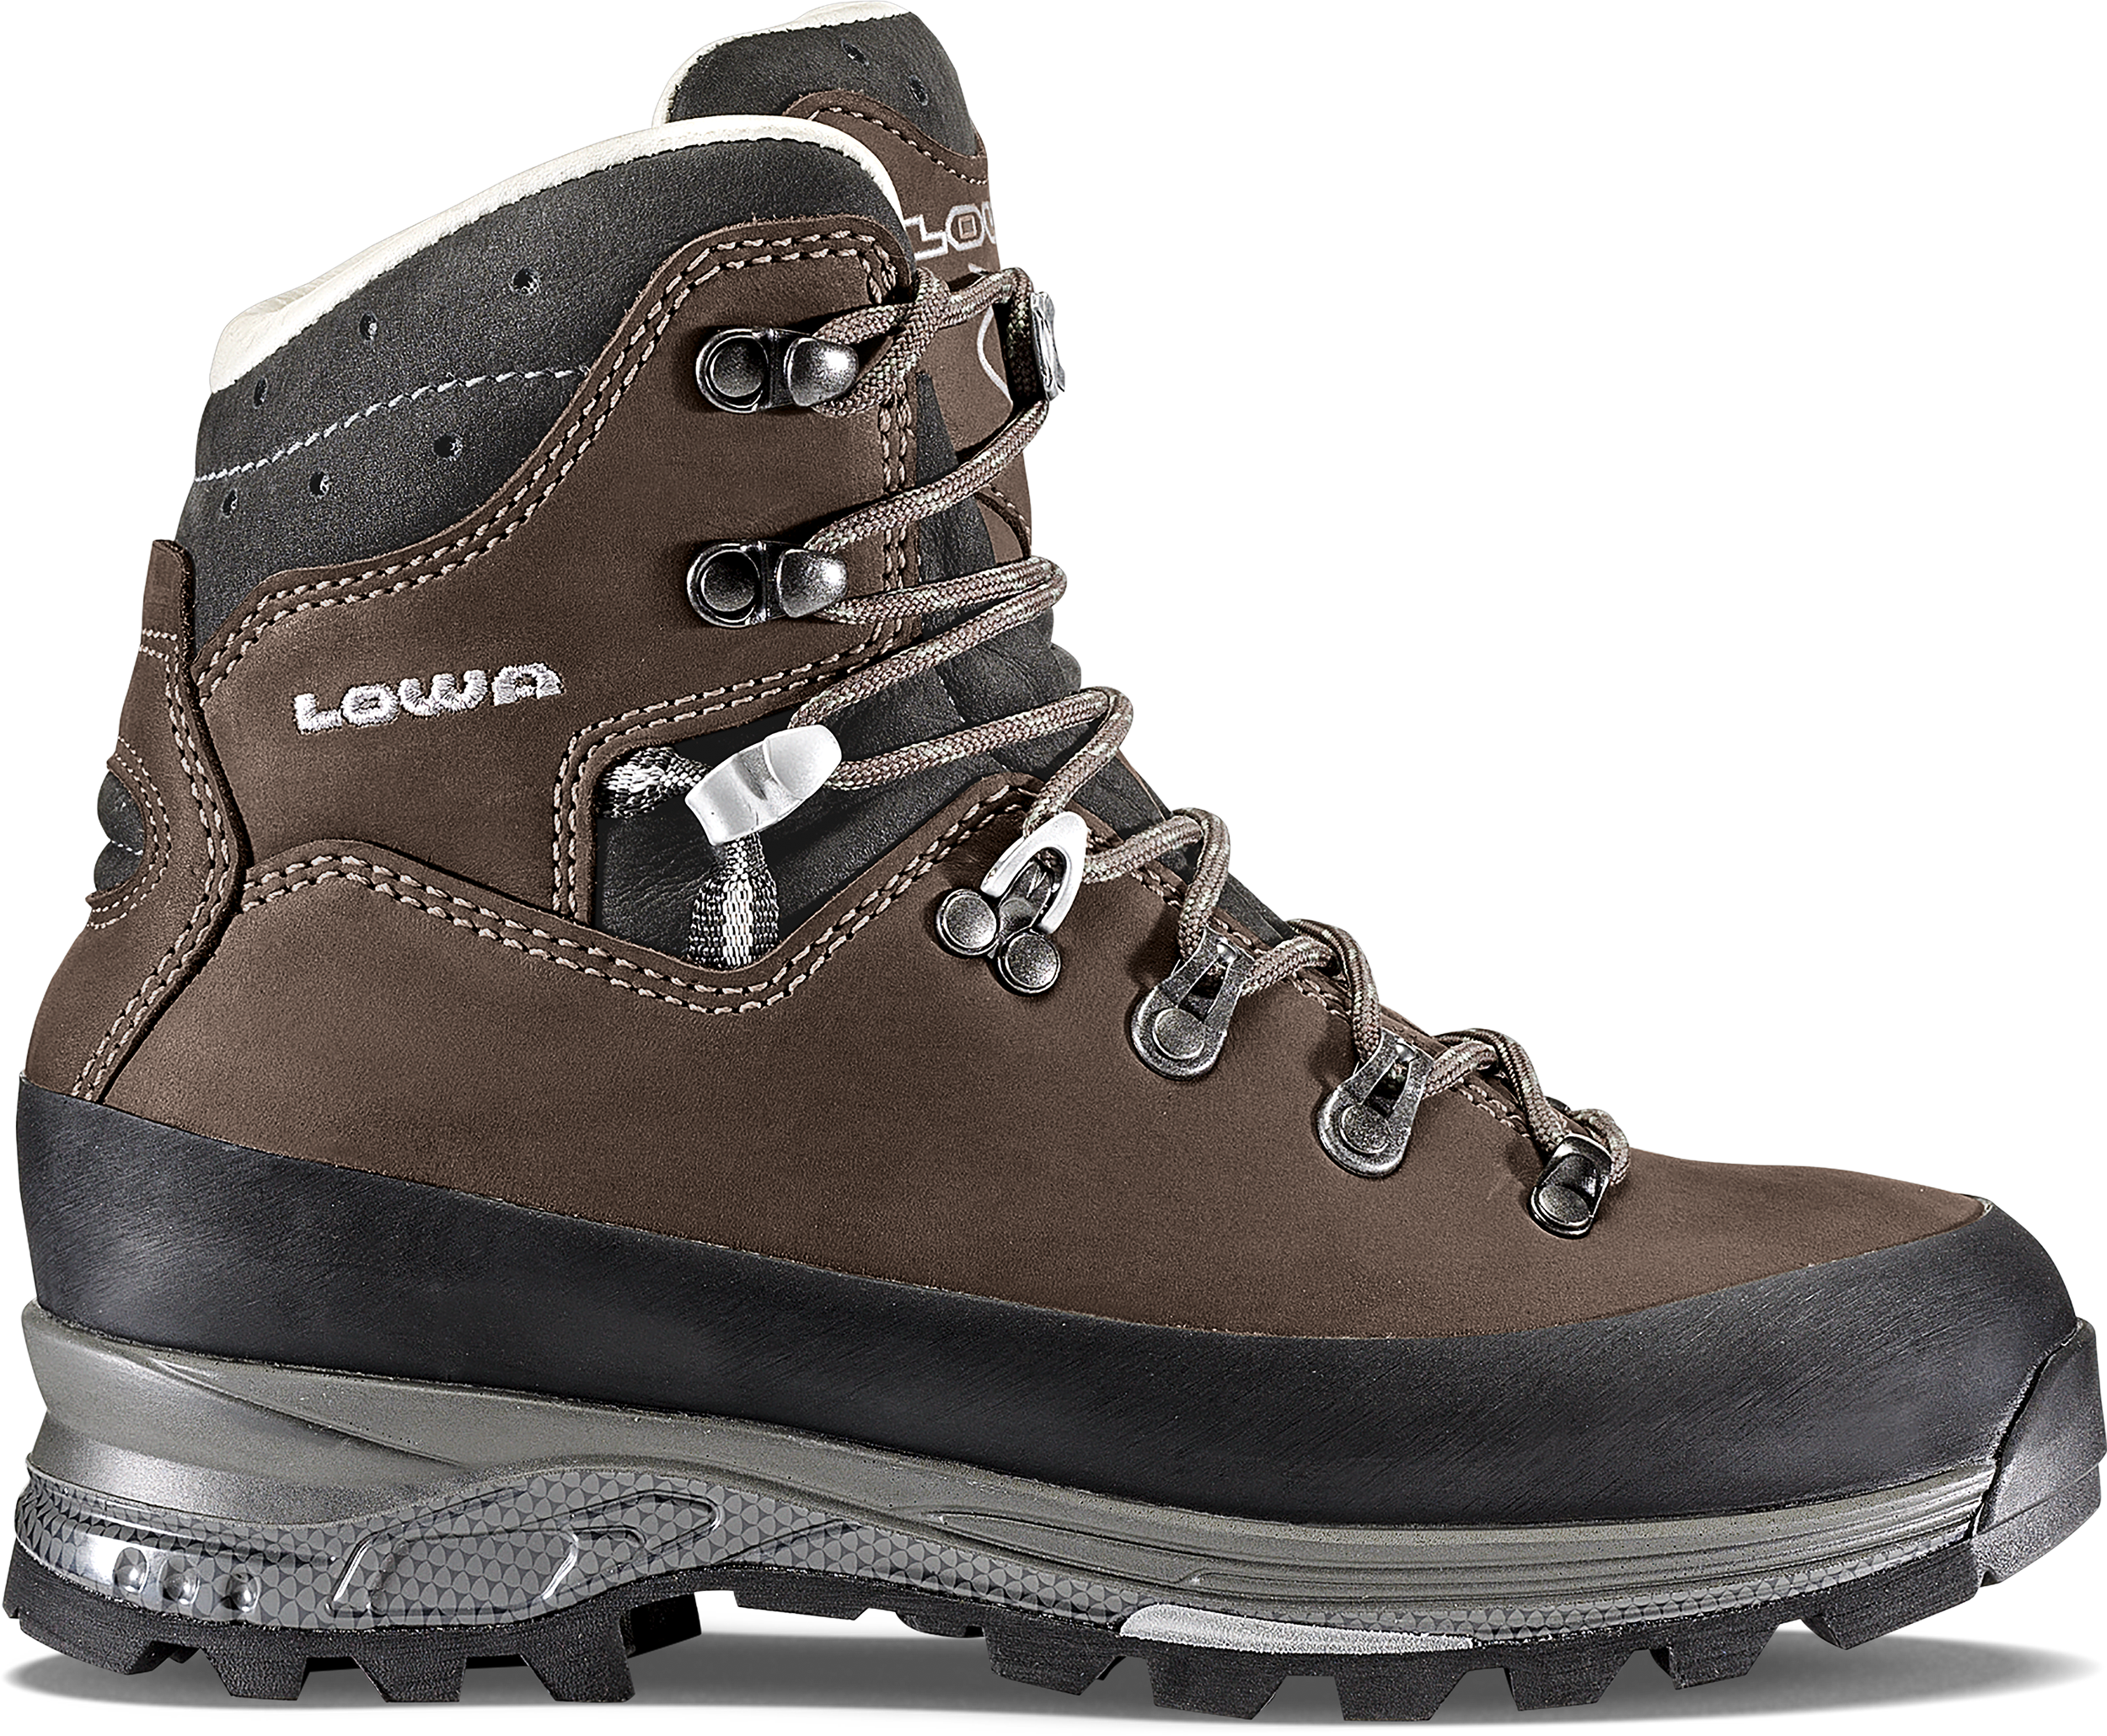 Performance Lacets de Chaussures de Randonnée Outdoor Bottes Durable polyester made in Europe 